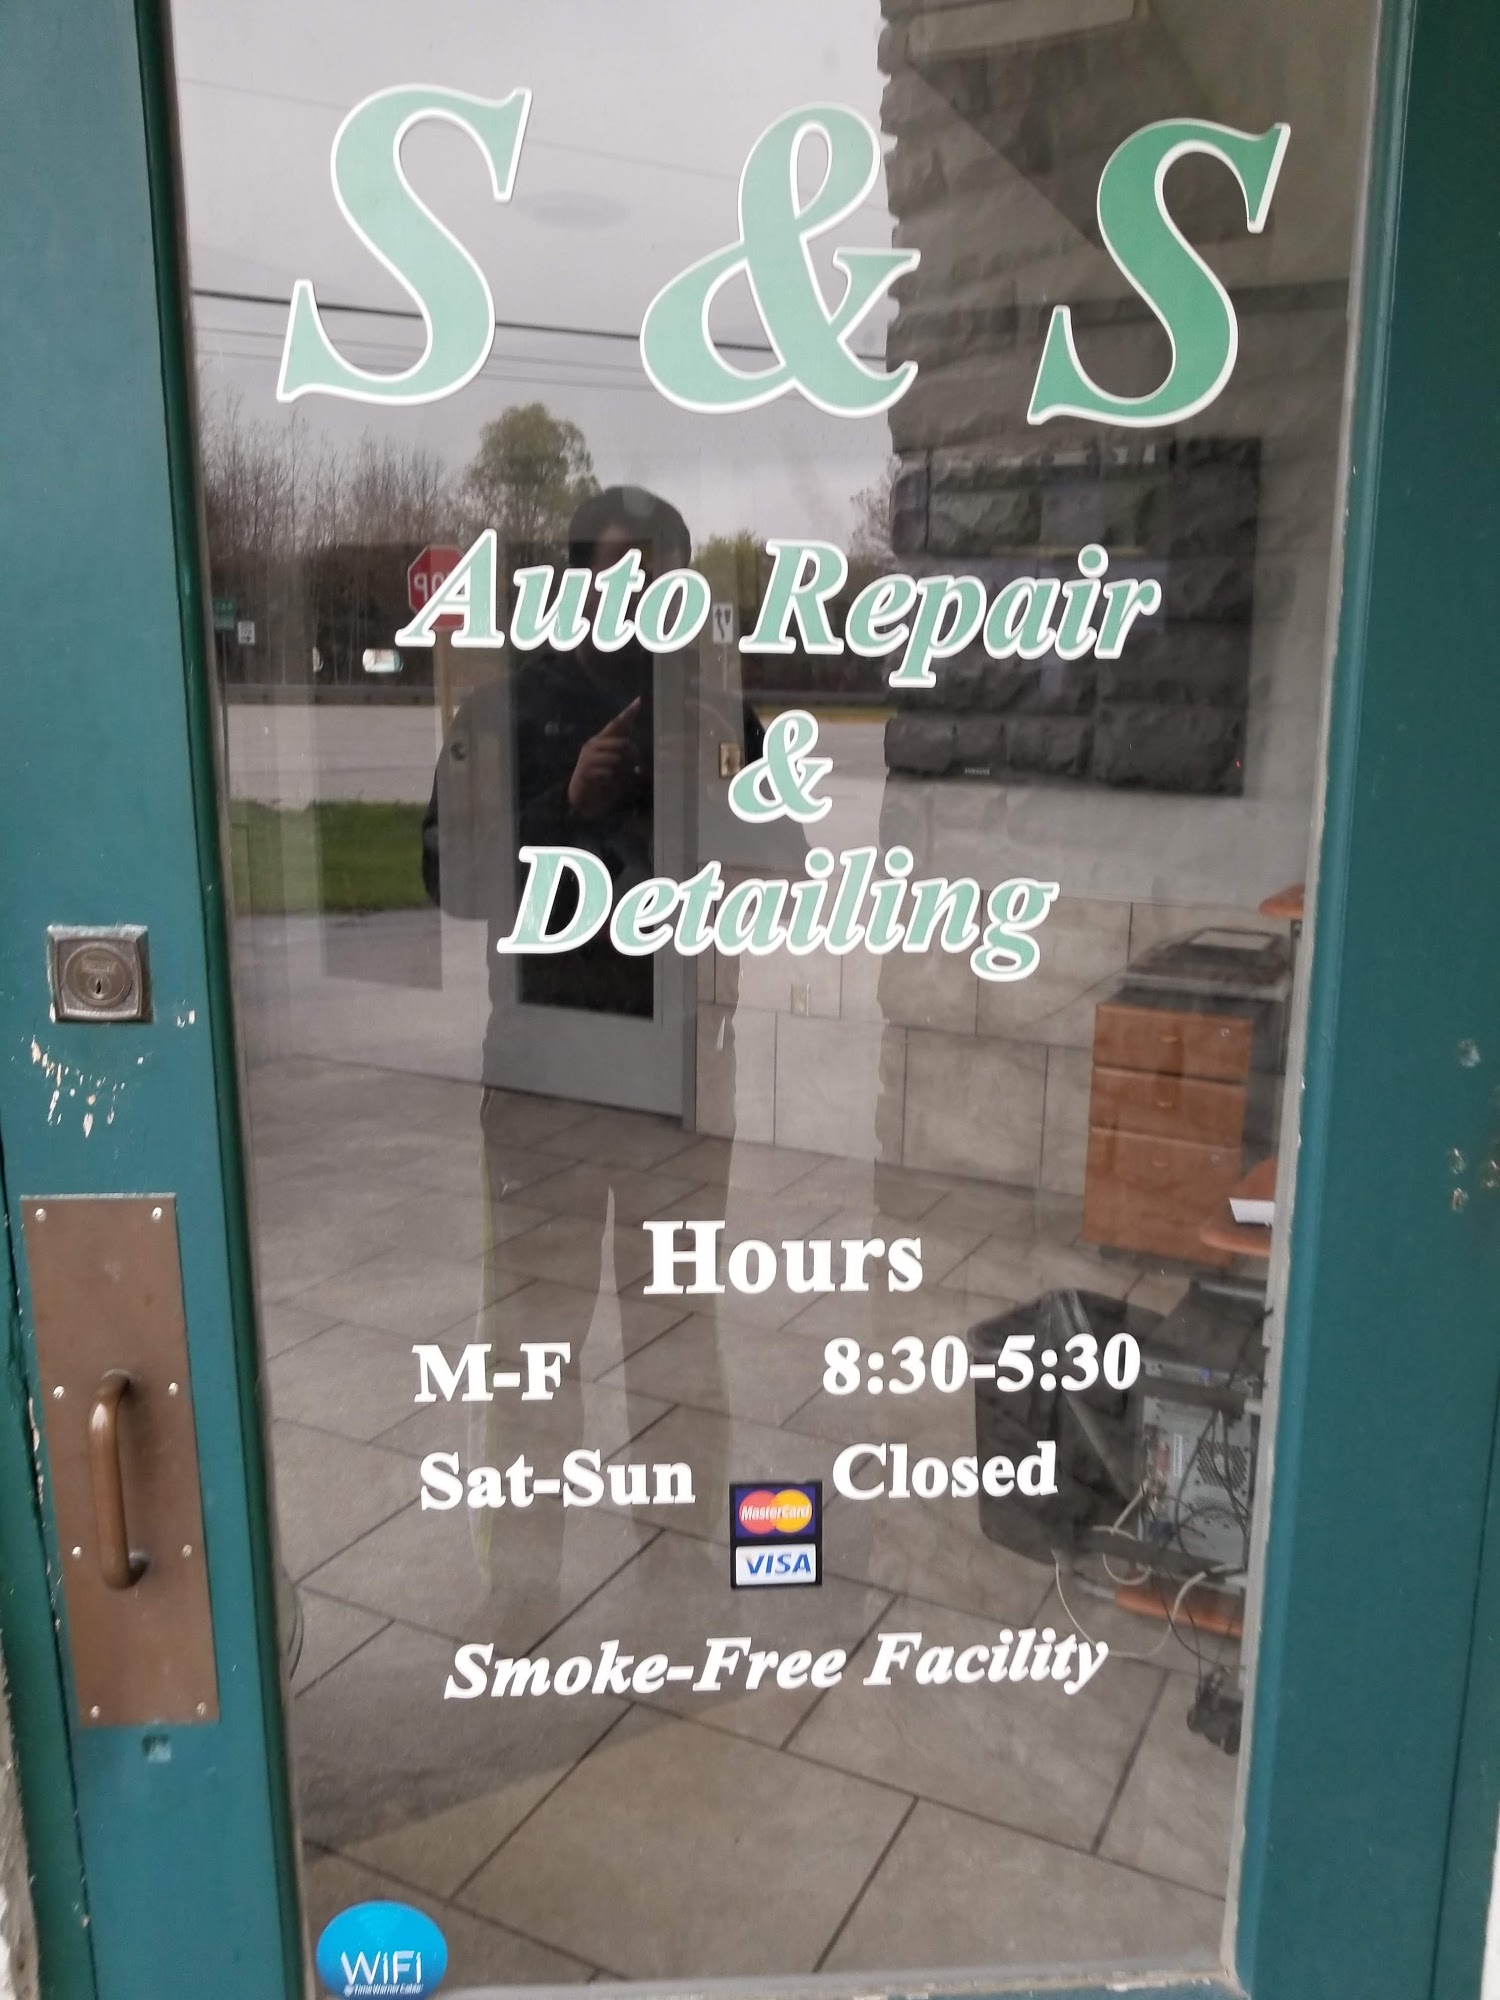 S & S Auto Repair and Detailing